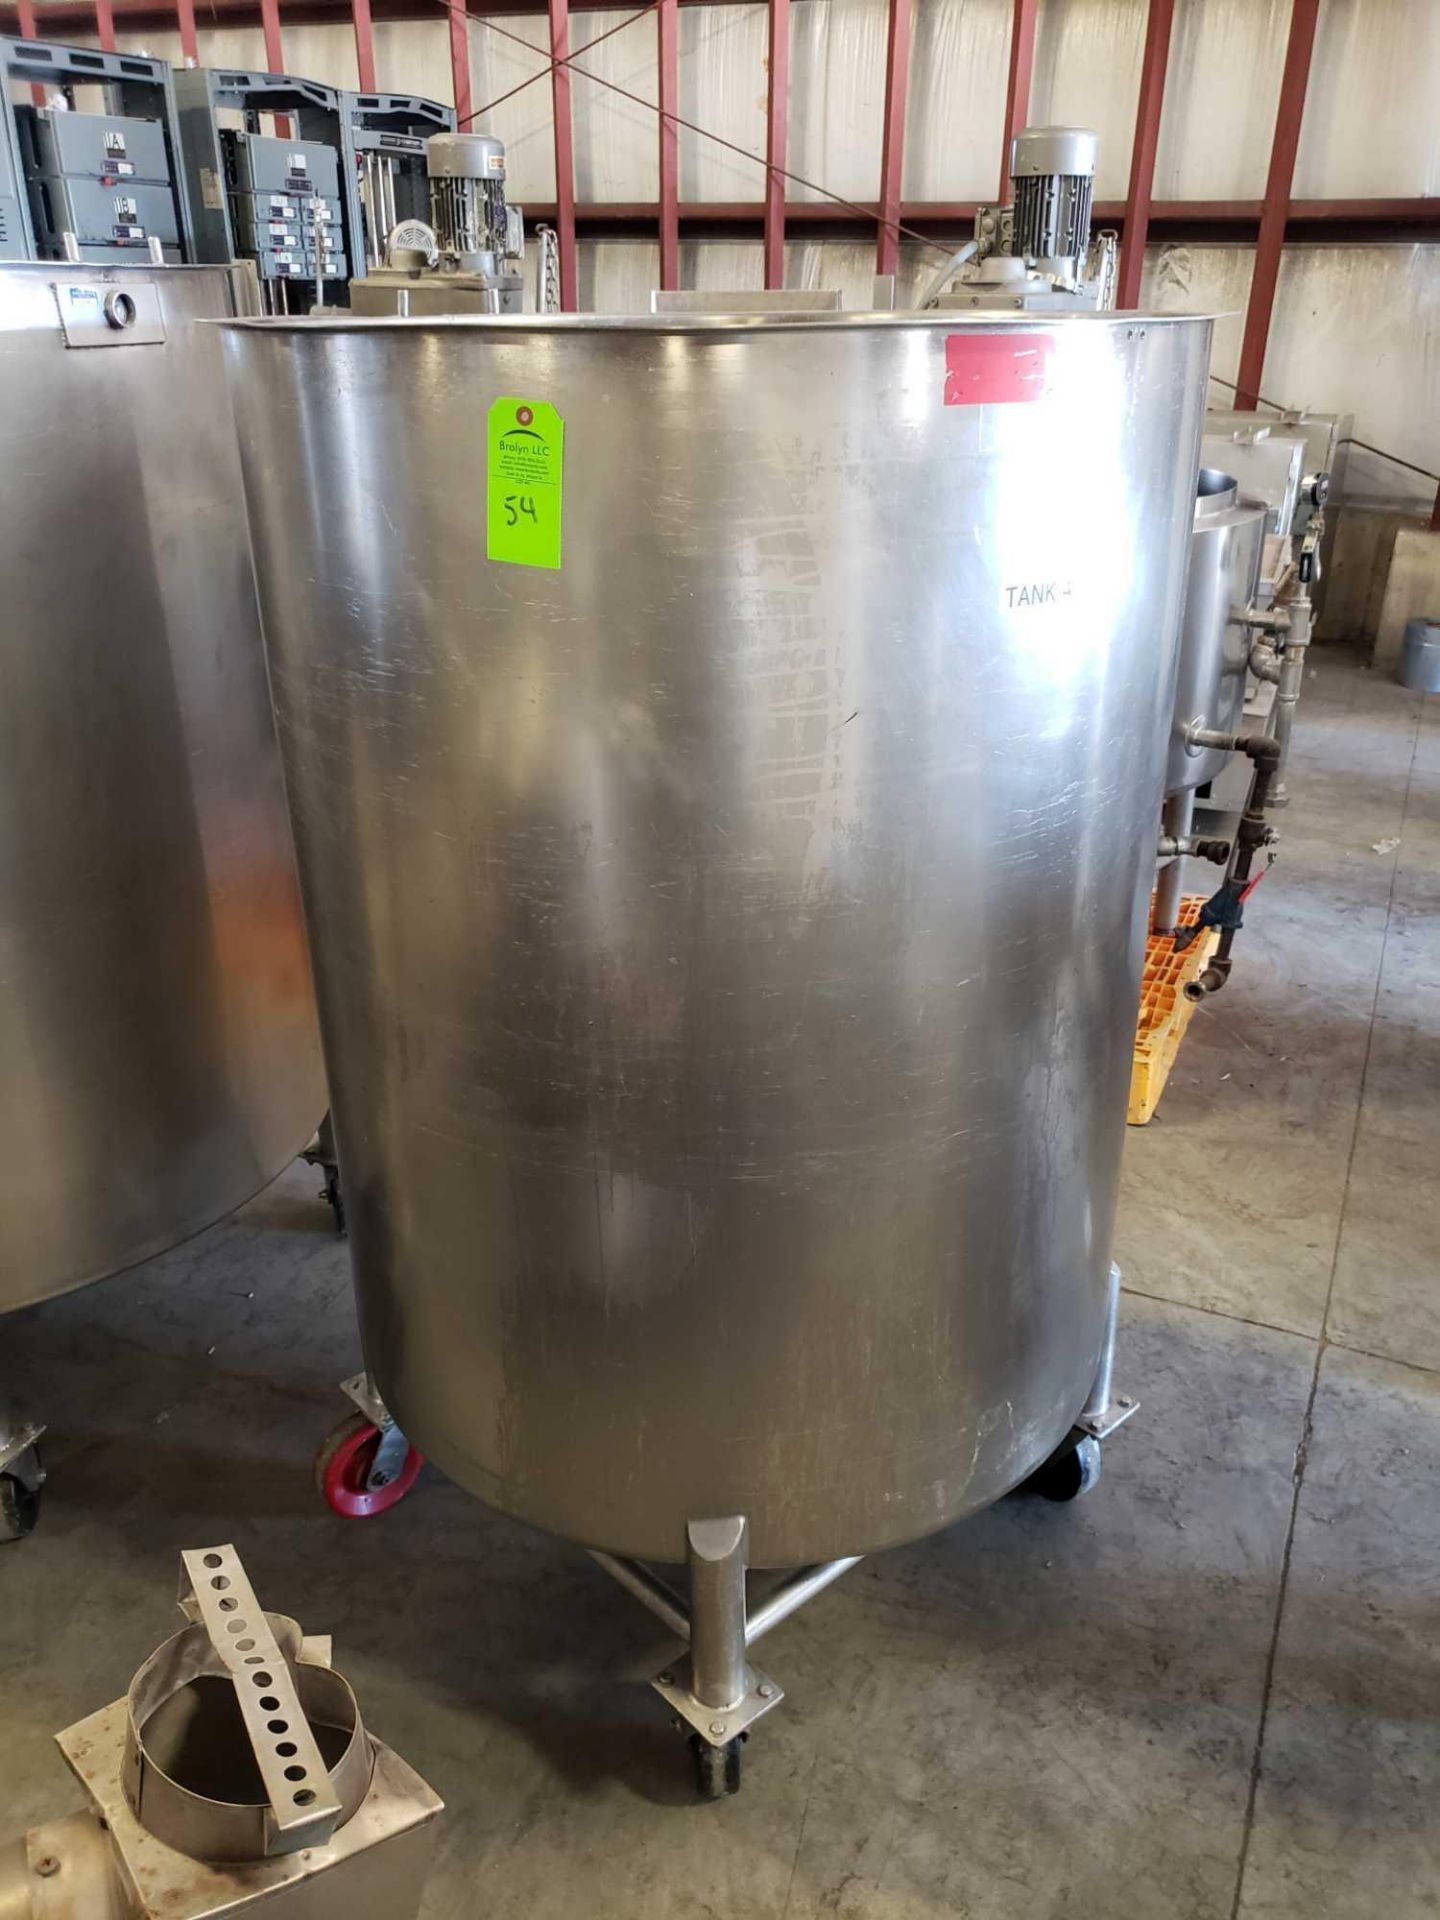 Stainless steel tank on casters. 40" diameter x 48" interior depth with lid inside. Est 250 gallon